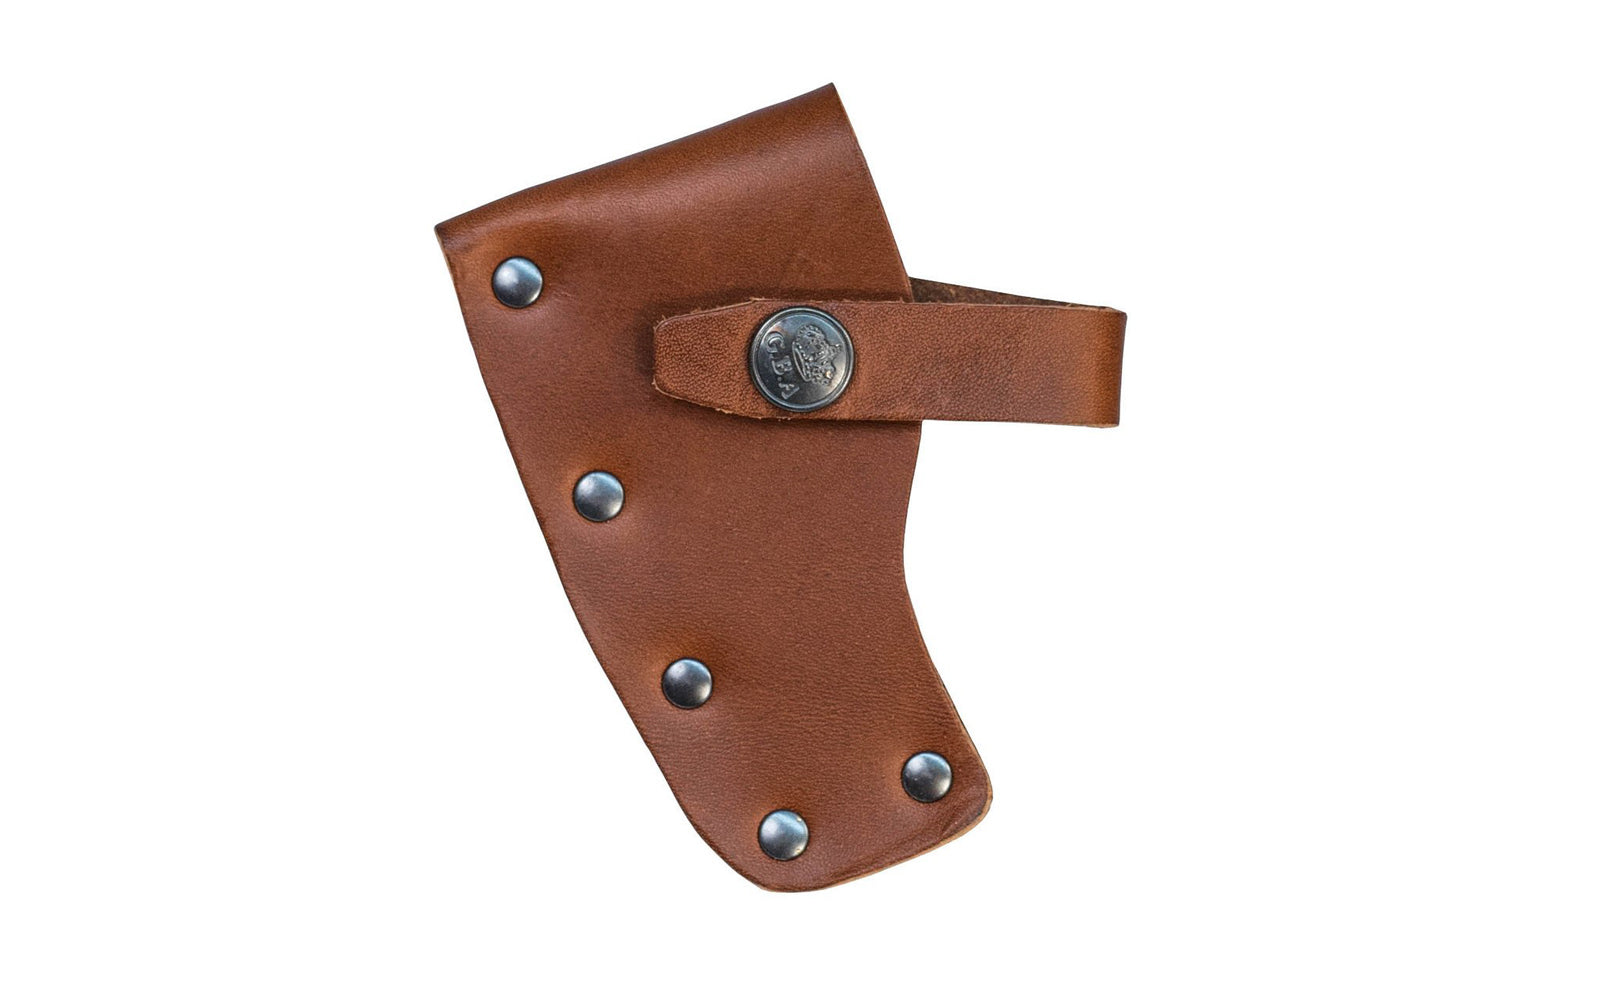 Gränsfors Bruk grain leather sheath is designed for the Carpenter's Axe No. 465. The vegetable-tanned leather is free from heavy metals & is biodegradable.  7391765465085. Model 465C